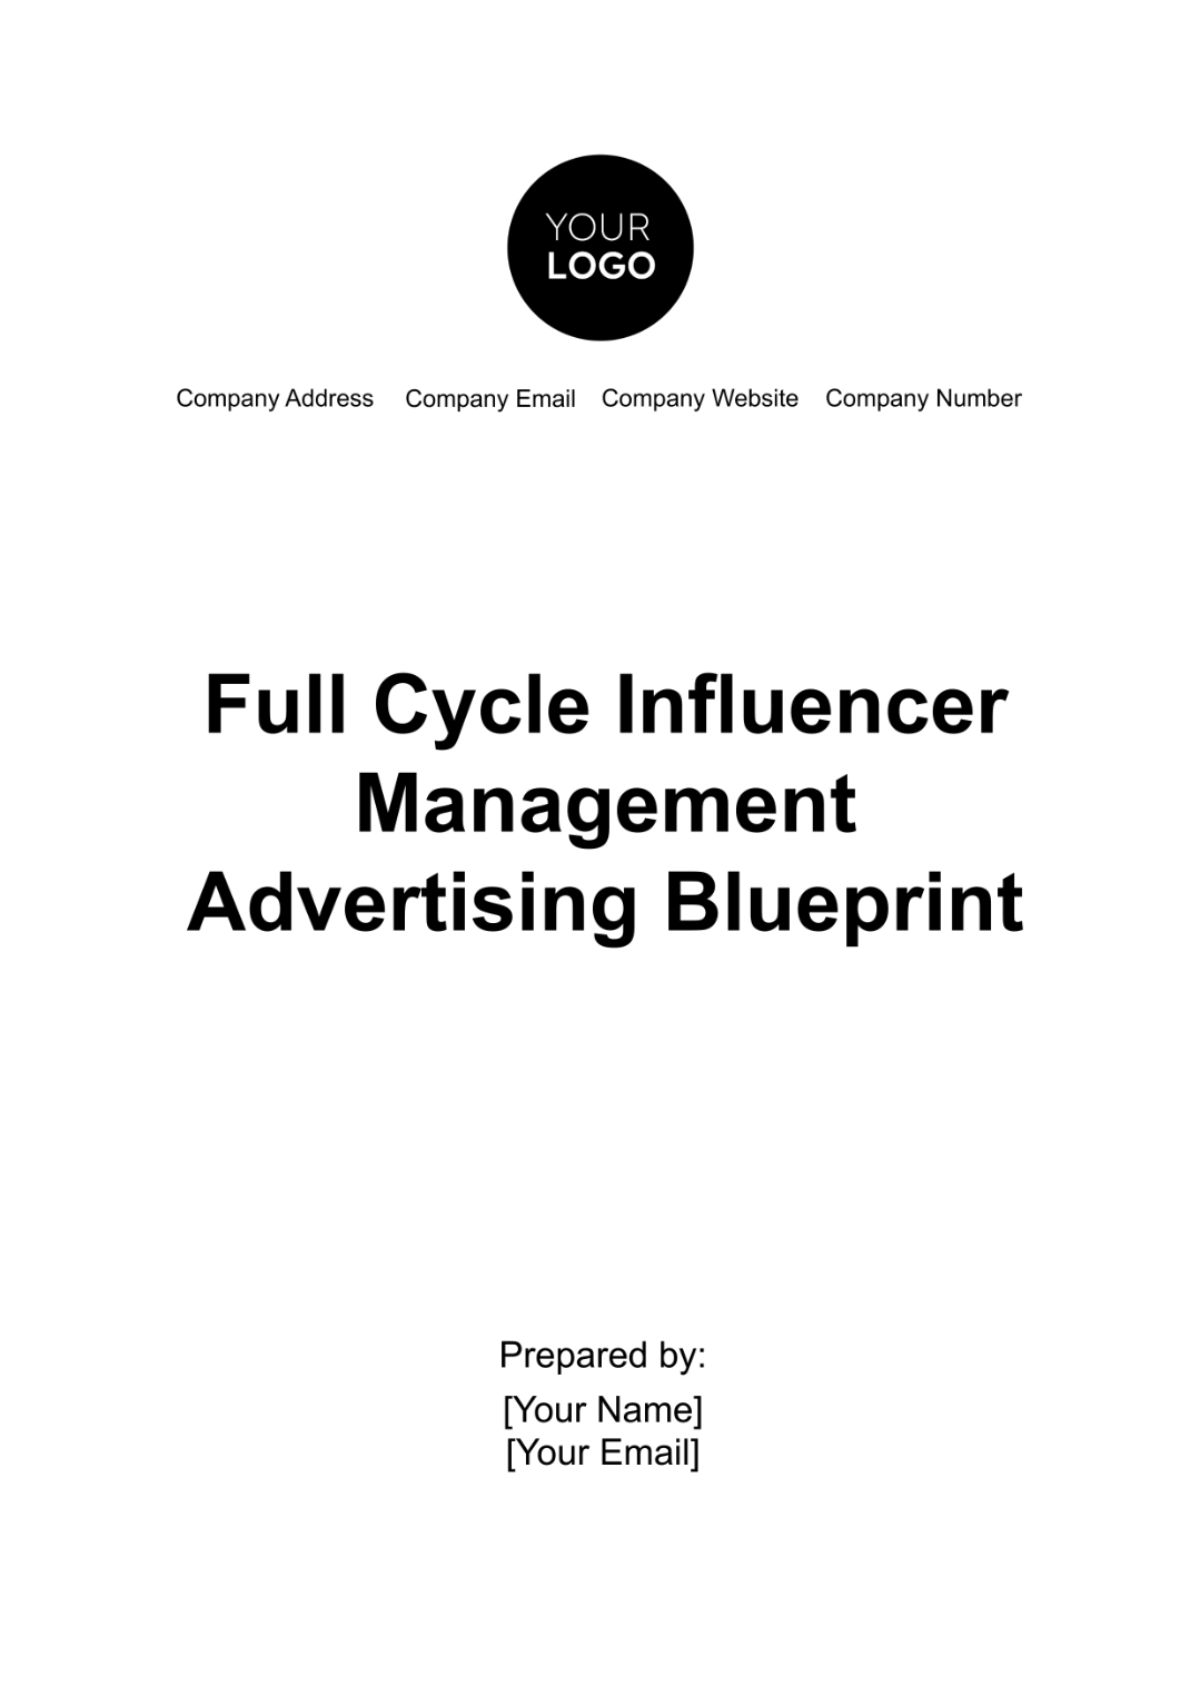 Full Cycle Influencer Management Advertising Blueprint Template